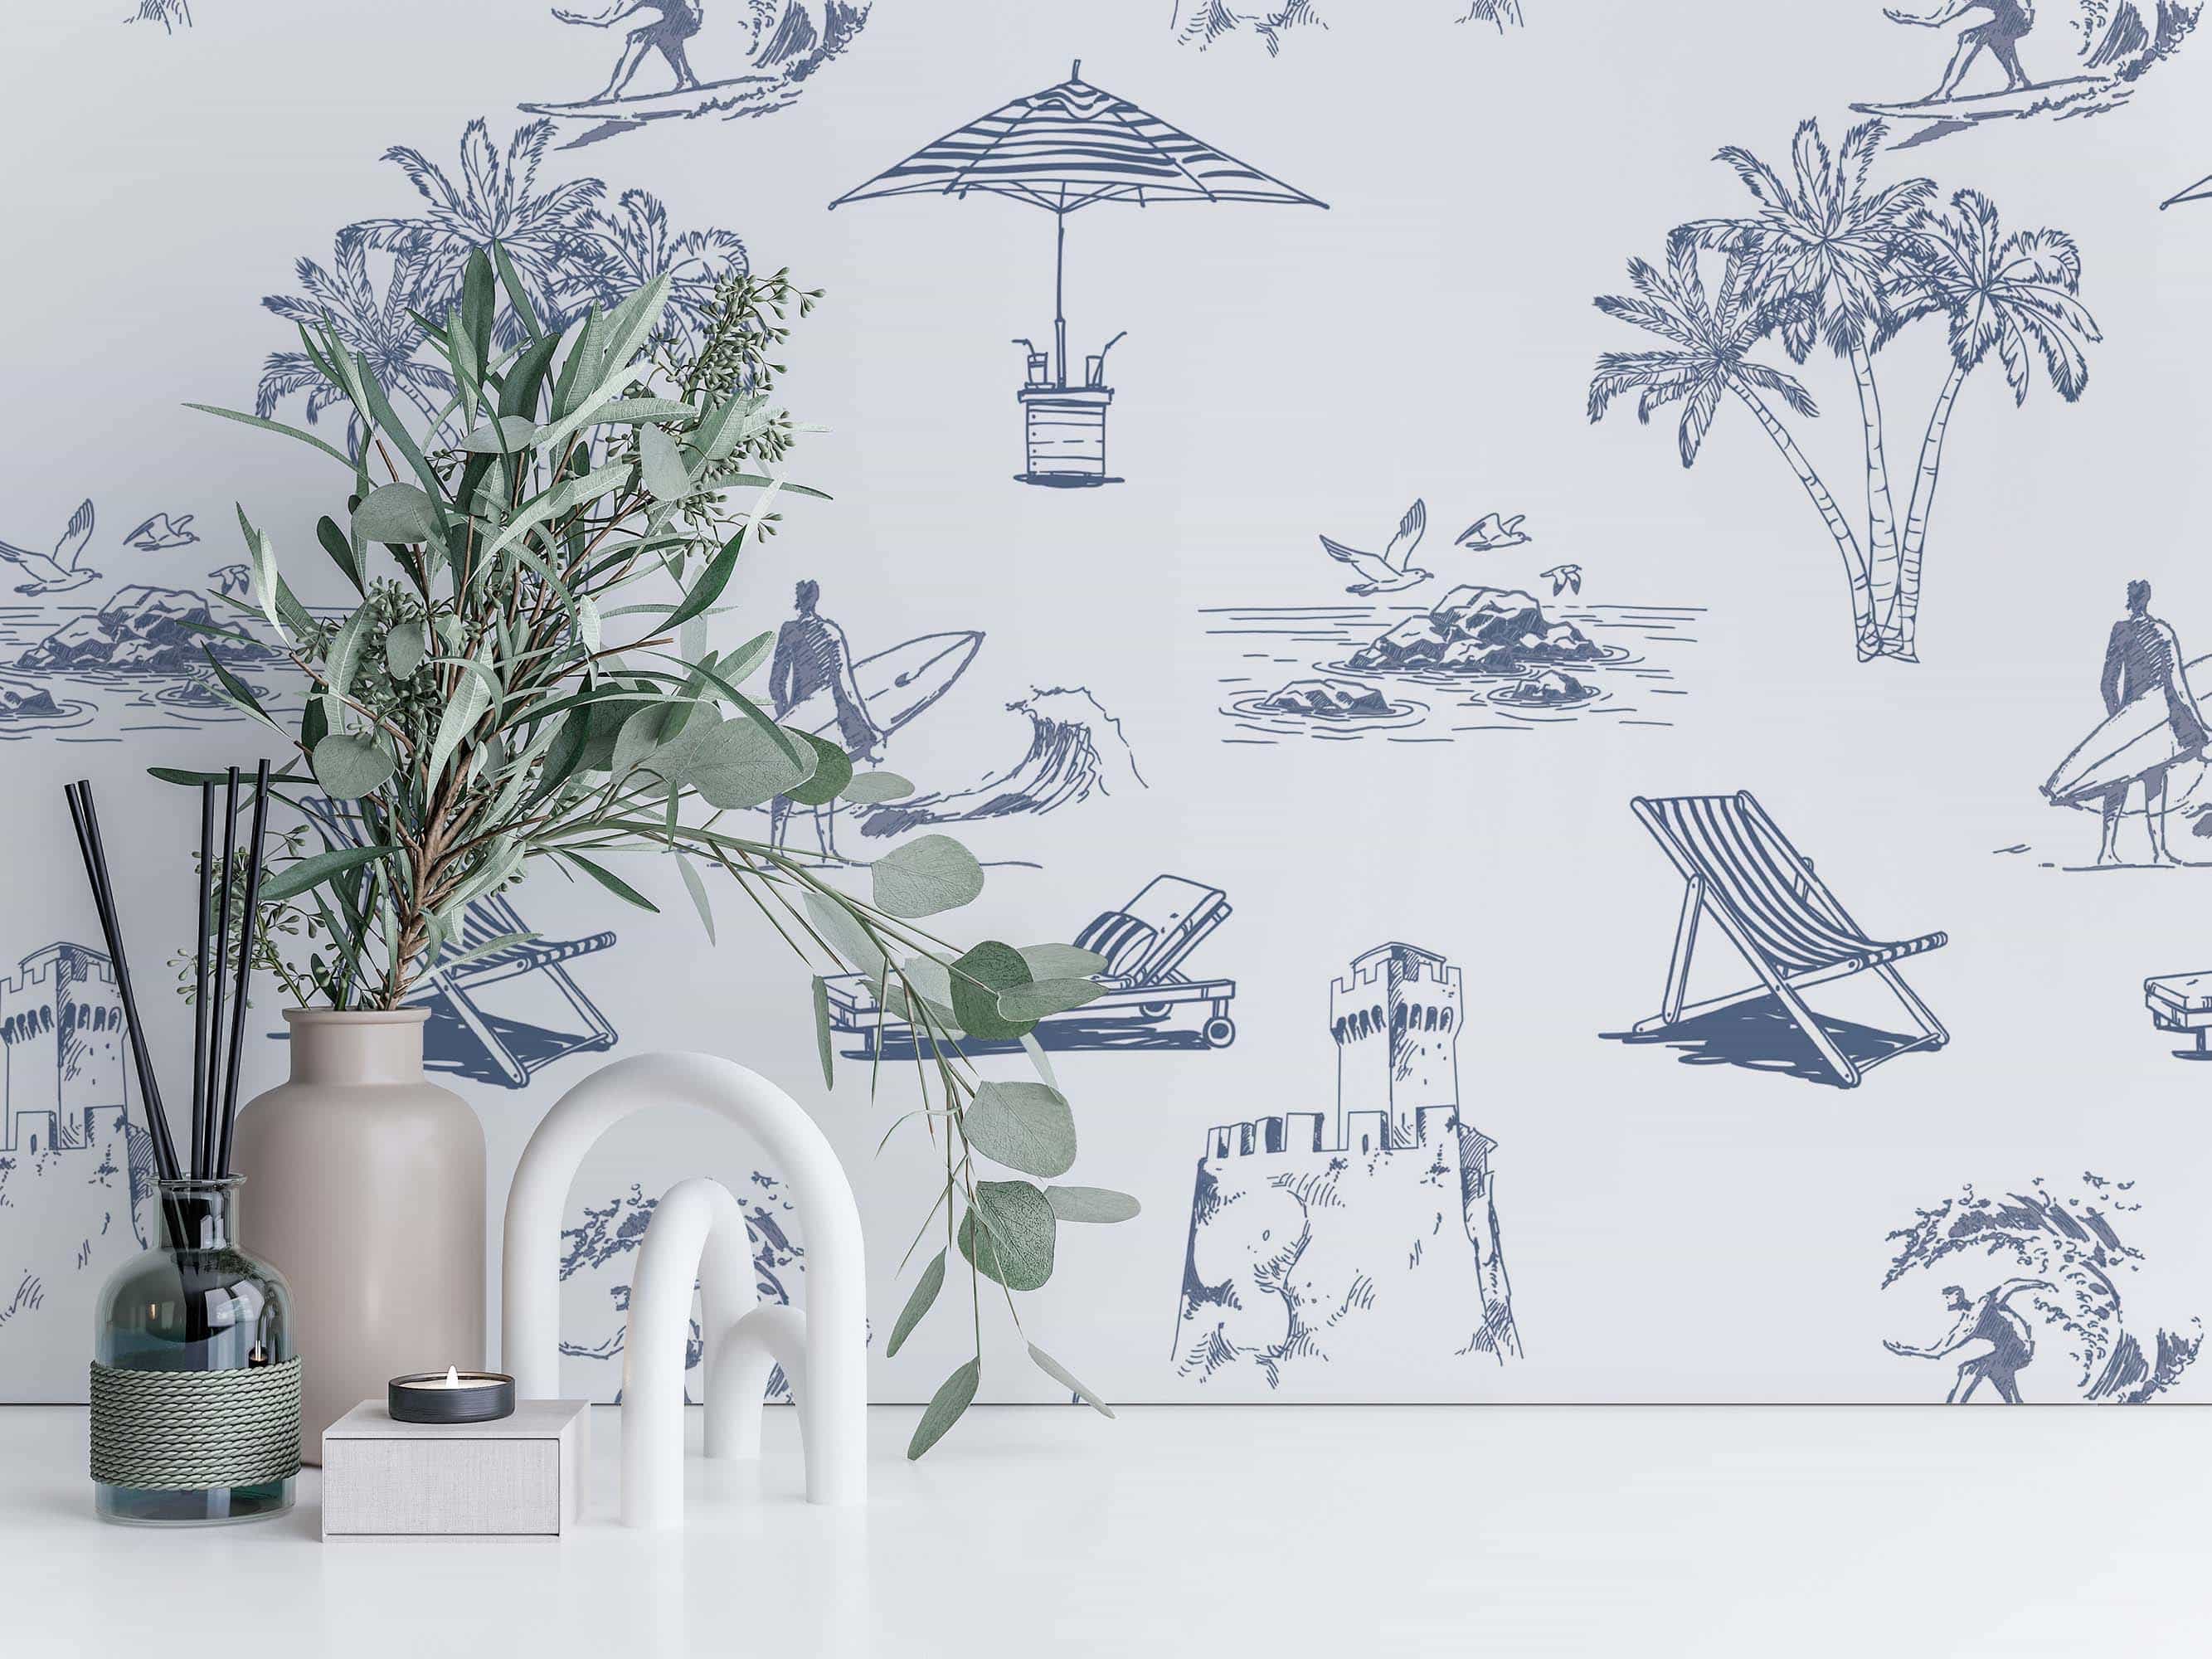 NextWall 3075sq ft Coastal Blue Vinyl IvyVines SelfAdhesive Peel and Stick  Wallpaper in the Wallpaper department at Lowescom